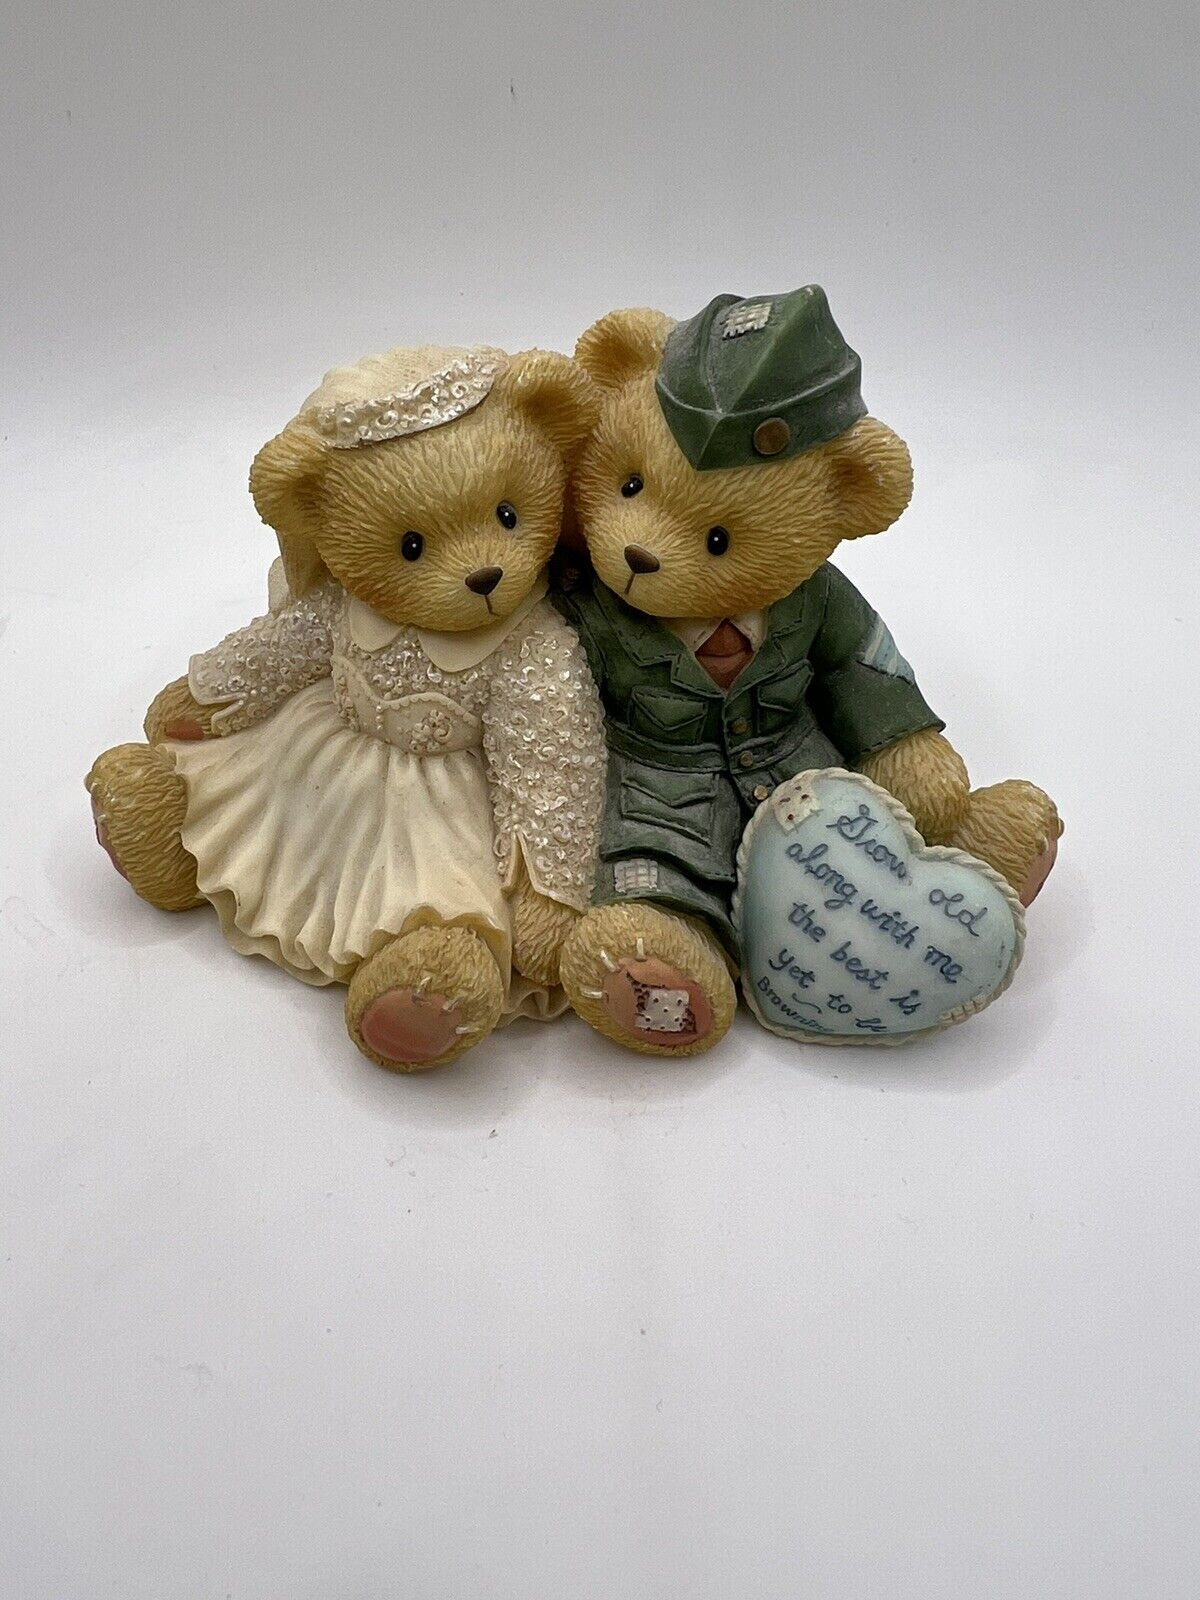 1997 Cherished Teddies Bear Figurine Forever Yours Military Wife Bride Soldier